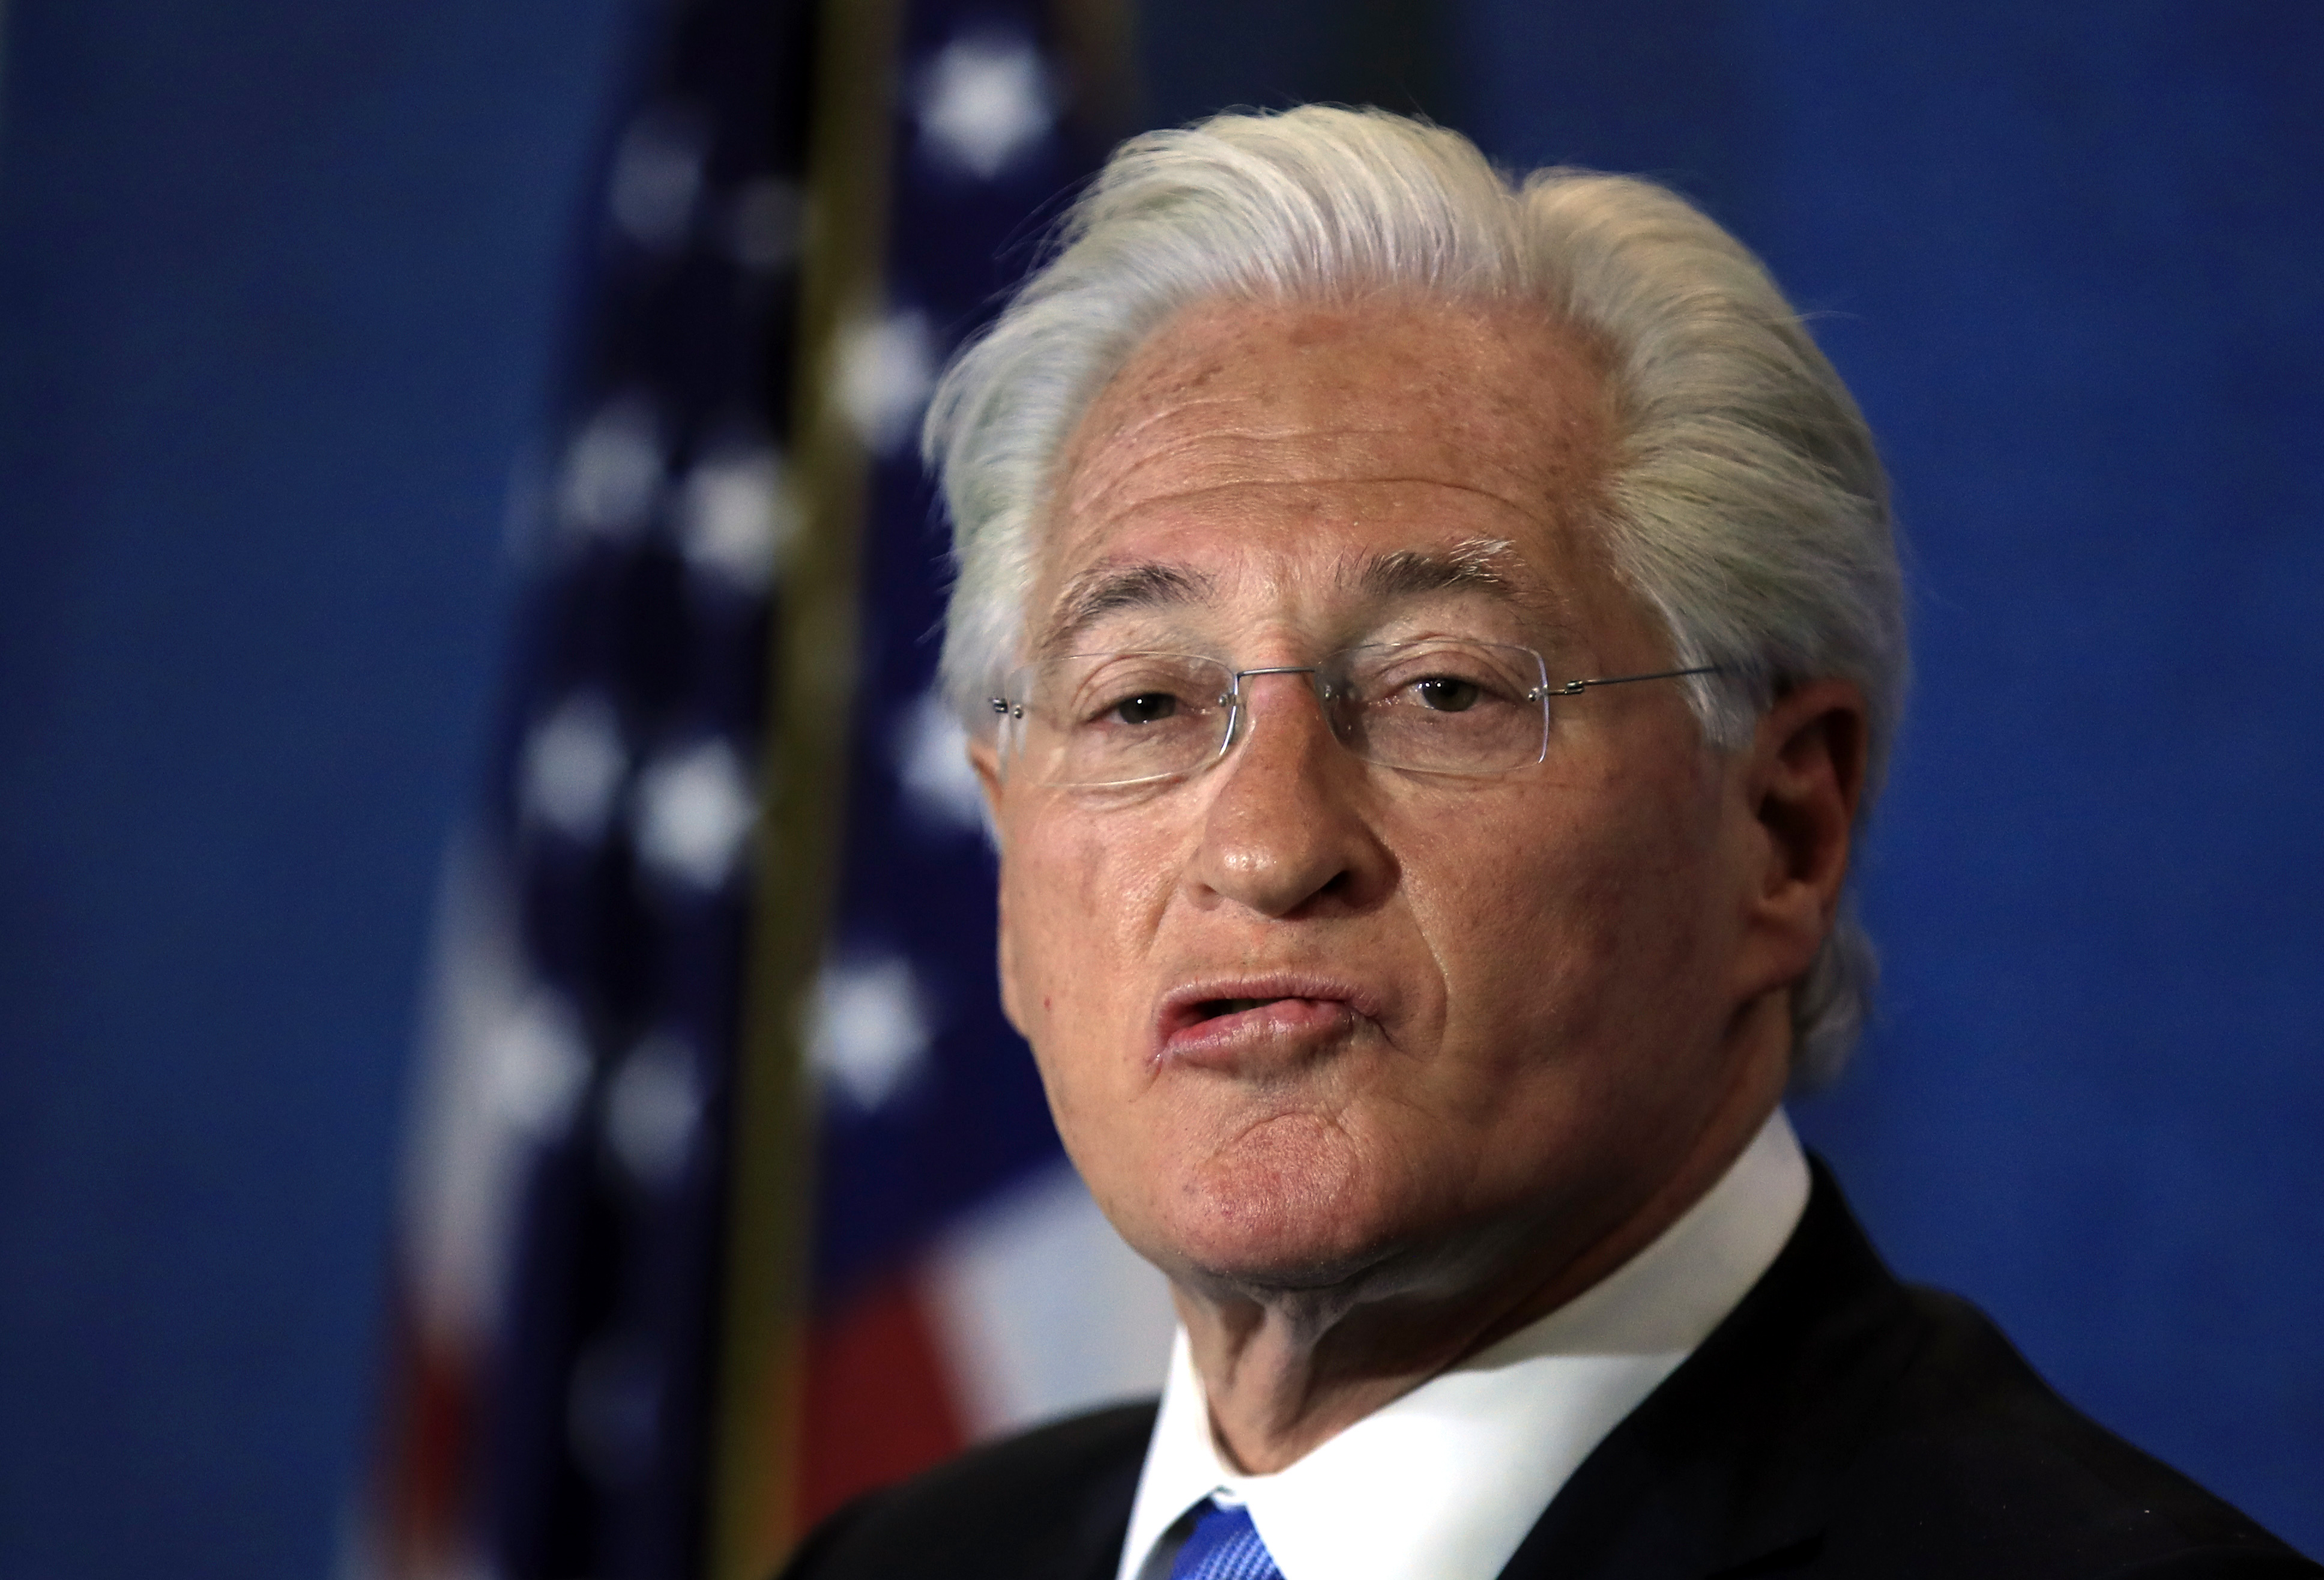 Marc Kasowitz personal attorney of President Donald Trump  makes a statement following the congressional testimony of former FBI Director James Comey at the National Press Club in Washington, Thursday, June 8, 2017.    (AP Photo/Manuel Balce Ceneta)